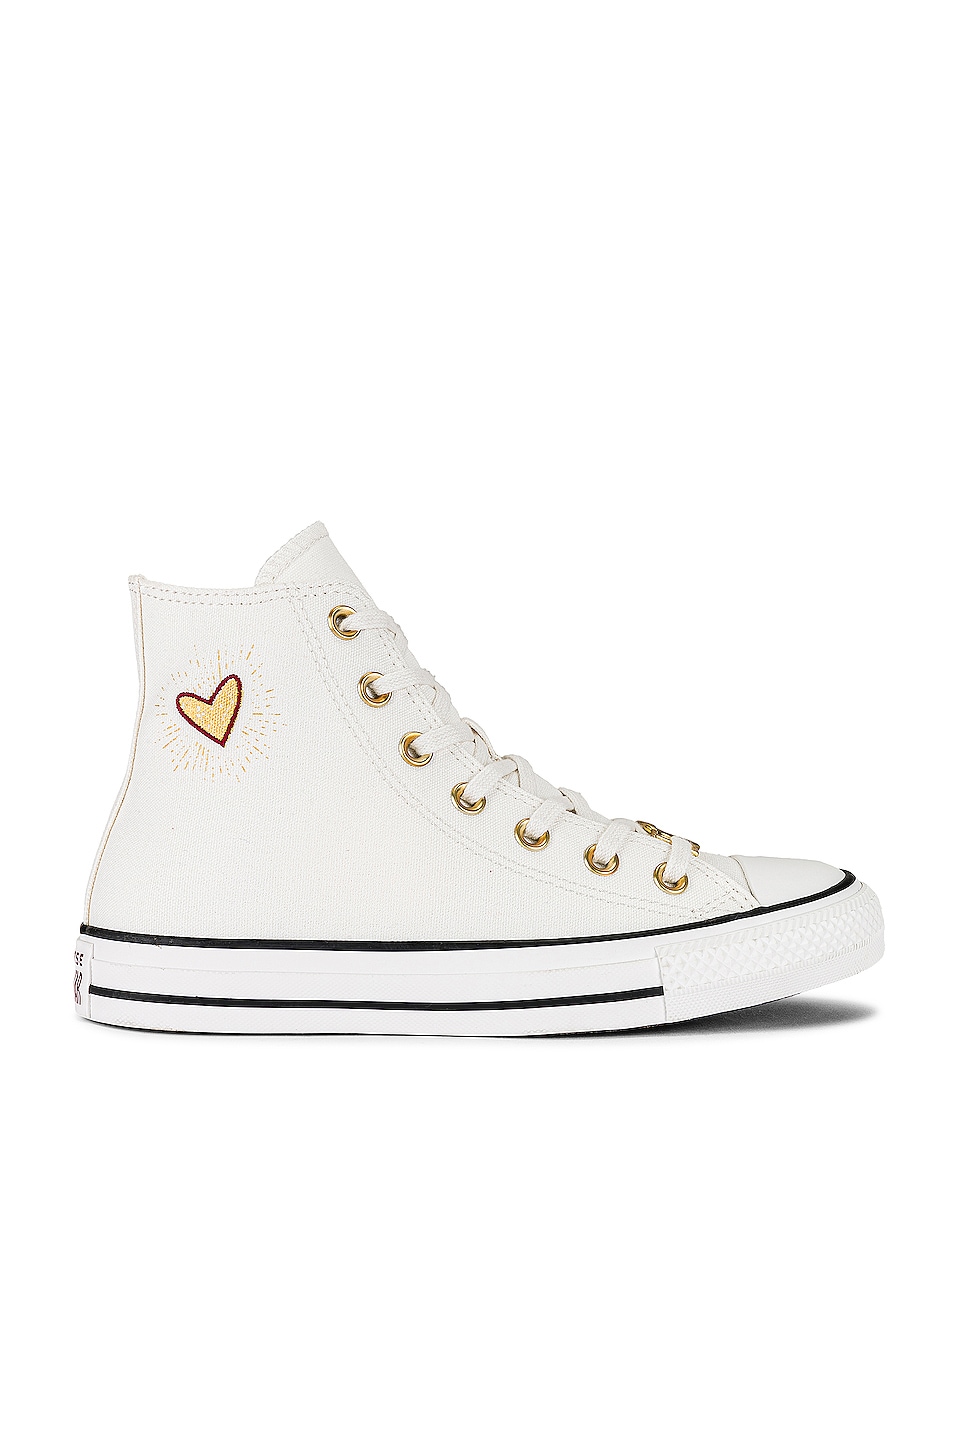 Converse Chuck Taylor All Star Radiating Love Sneaker in Vintage White,  White, & Back Alley Brick | REVOLVE